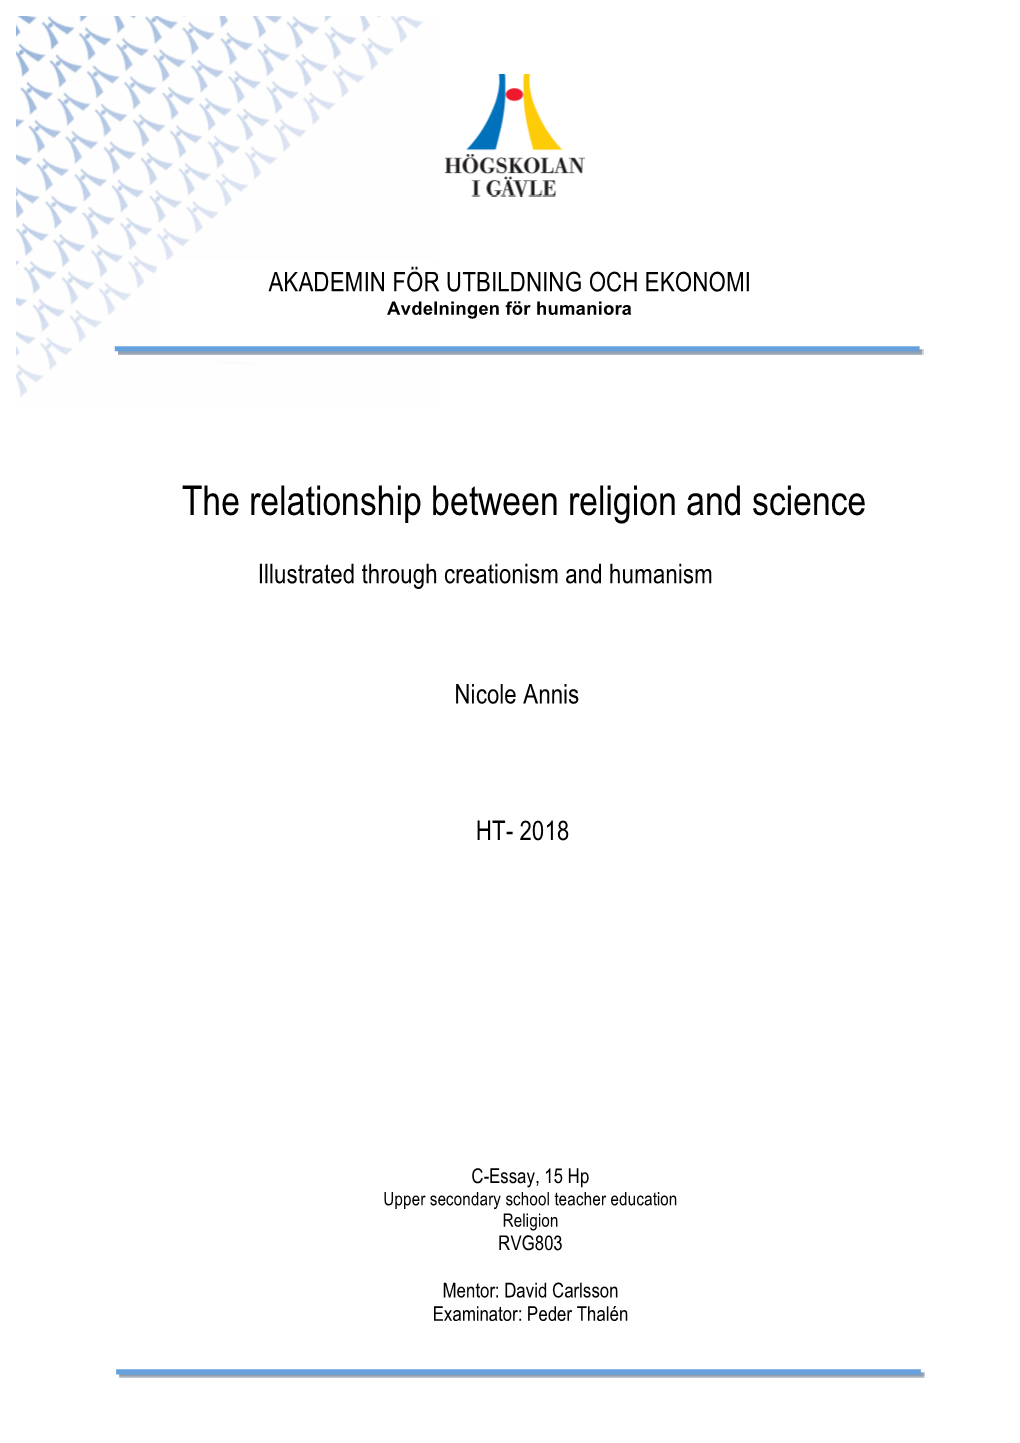 The Relationship Between Religion and Science